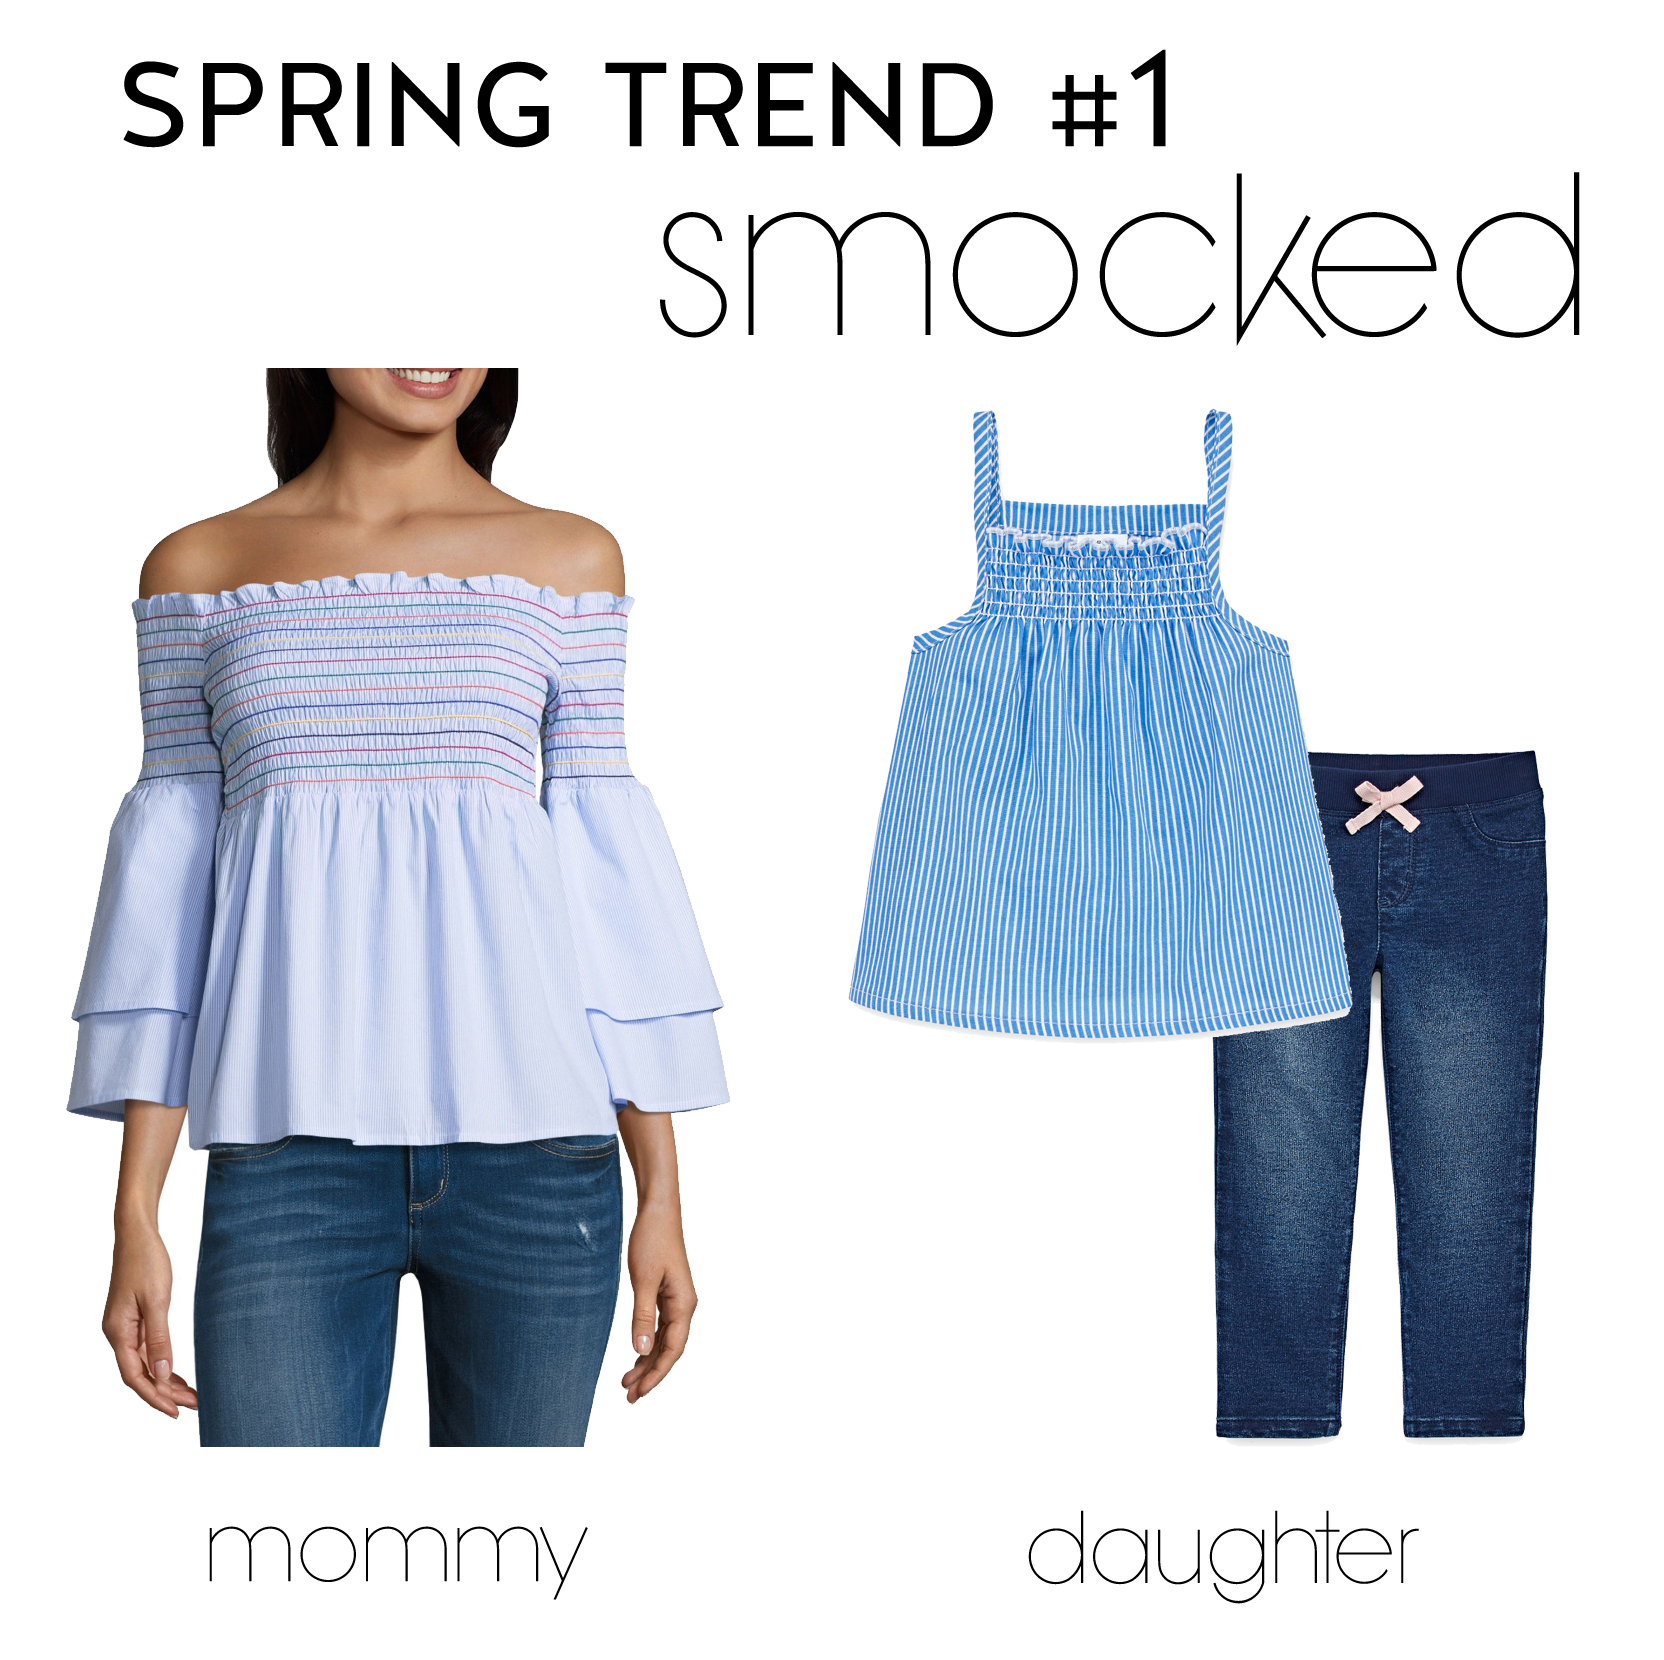 cute & little | dallas fashion blog | spring trends | mommy daughter twinning off shoulder chambray - Affordable Mommy + Me Twinning In Spring Trends by popular Dallas fashion blogger cute & little